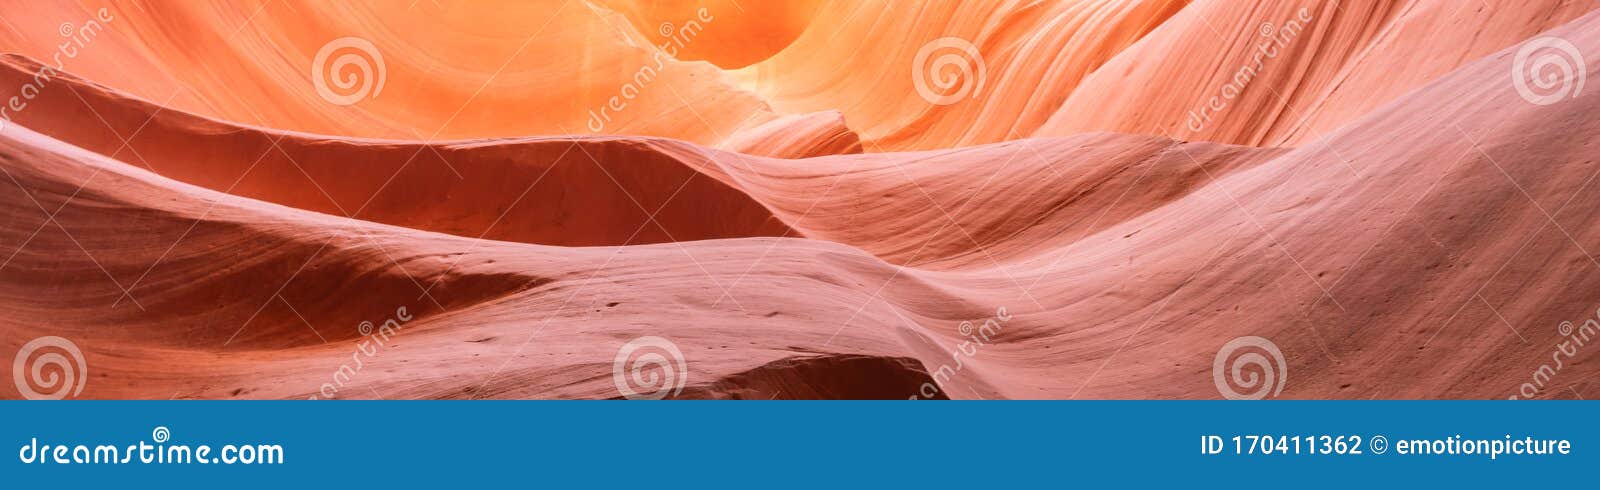 canyon antelope near page, arizona, background and abstract concept